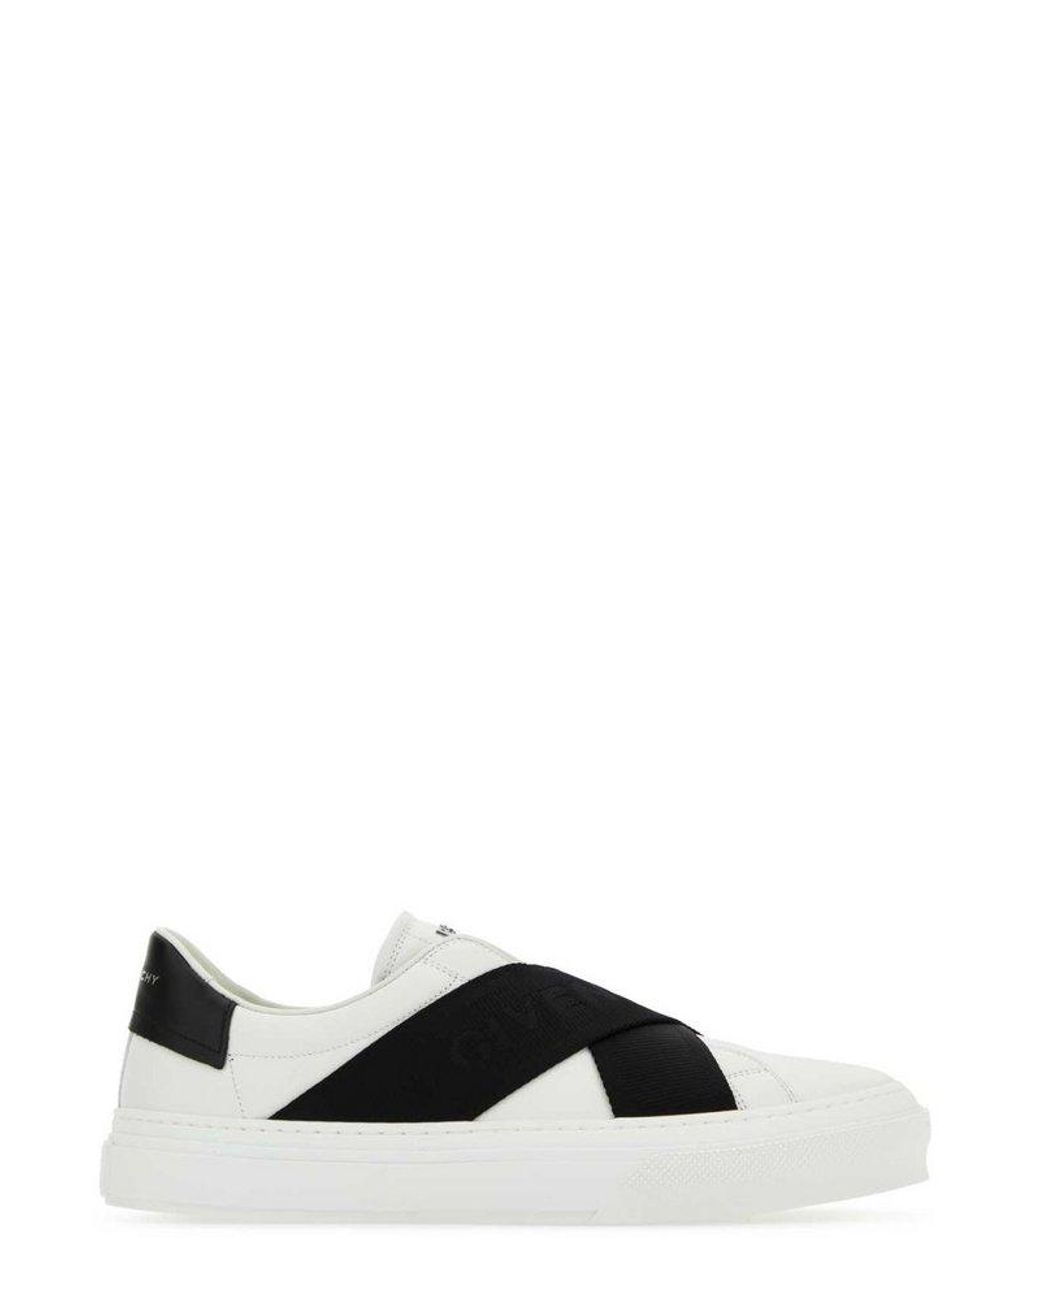 Givenchy City Sport Double Webbing Strap Sneakers in Black for Men | Lyst